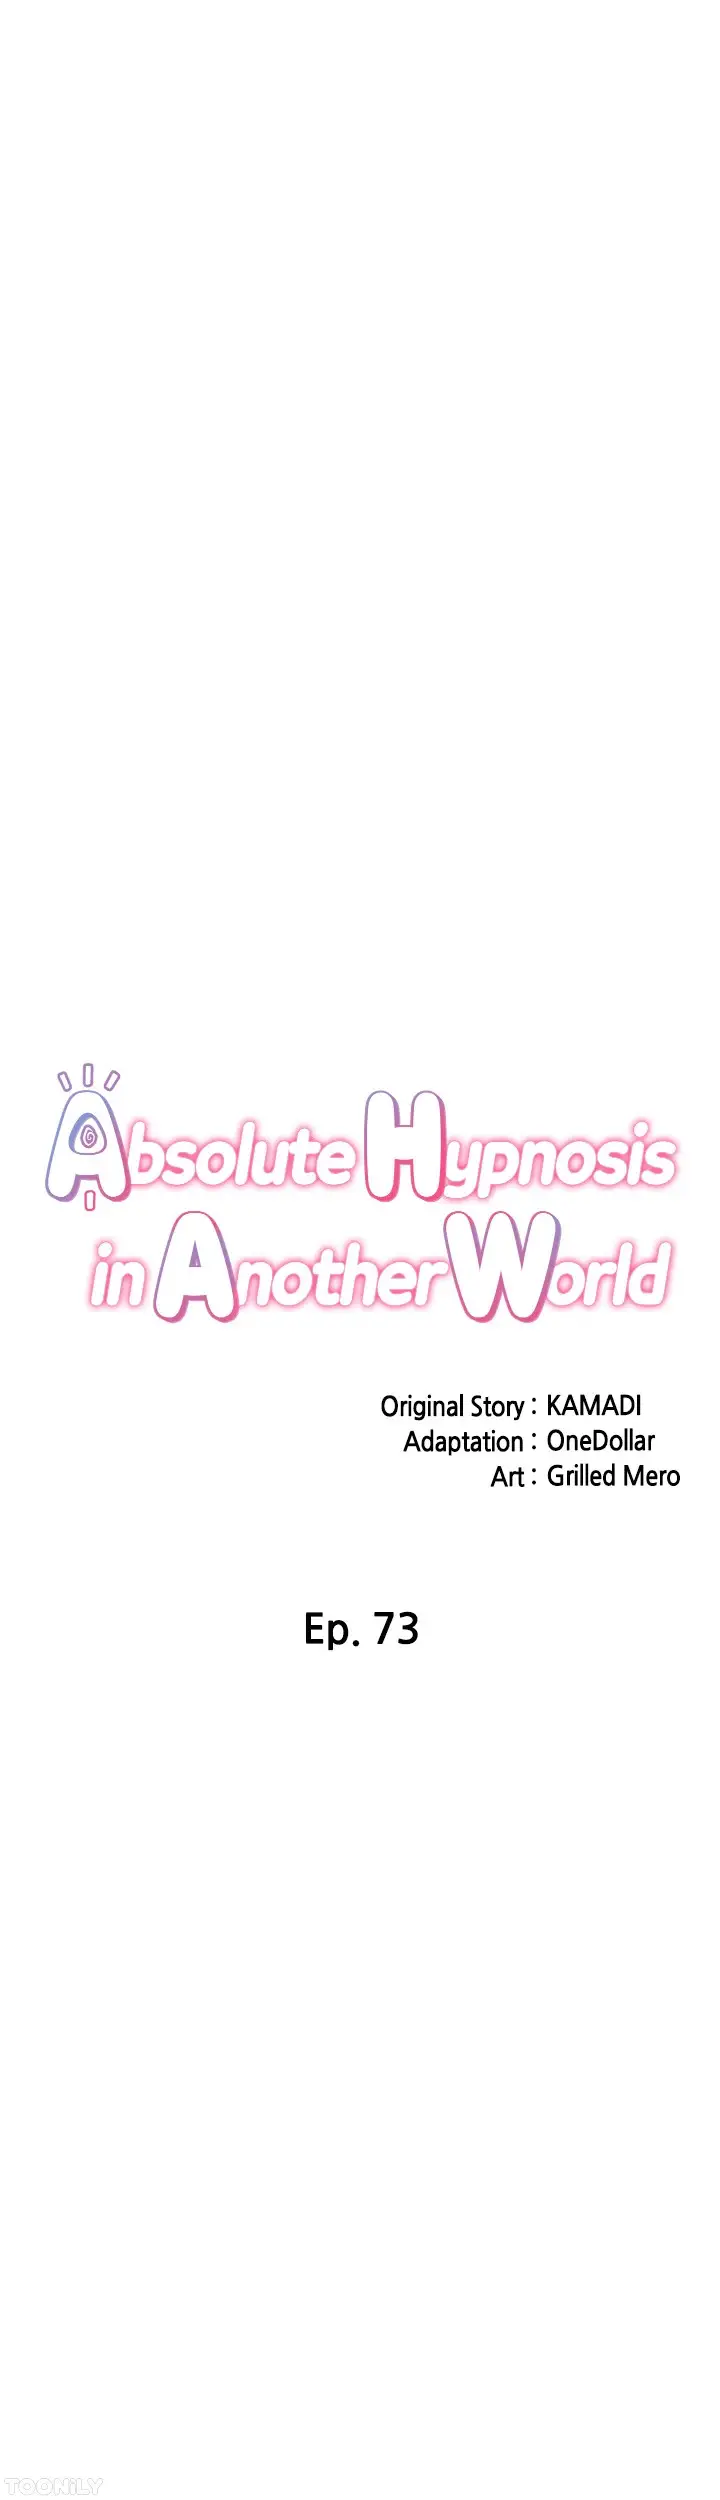 absolute-hypnosis-in-another-world-chap-73-5